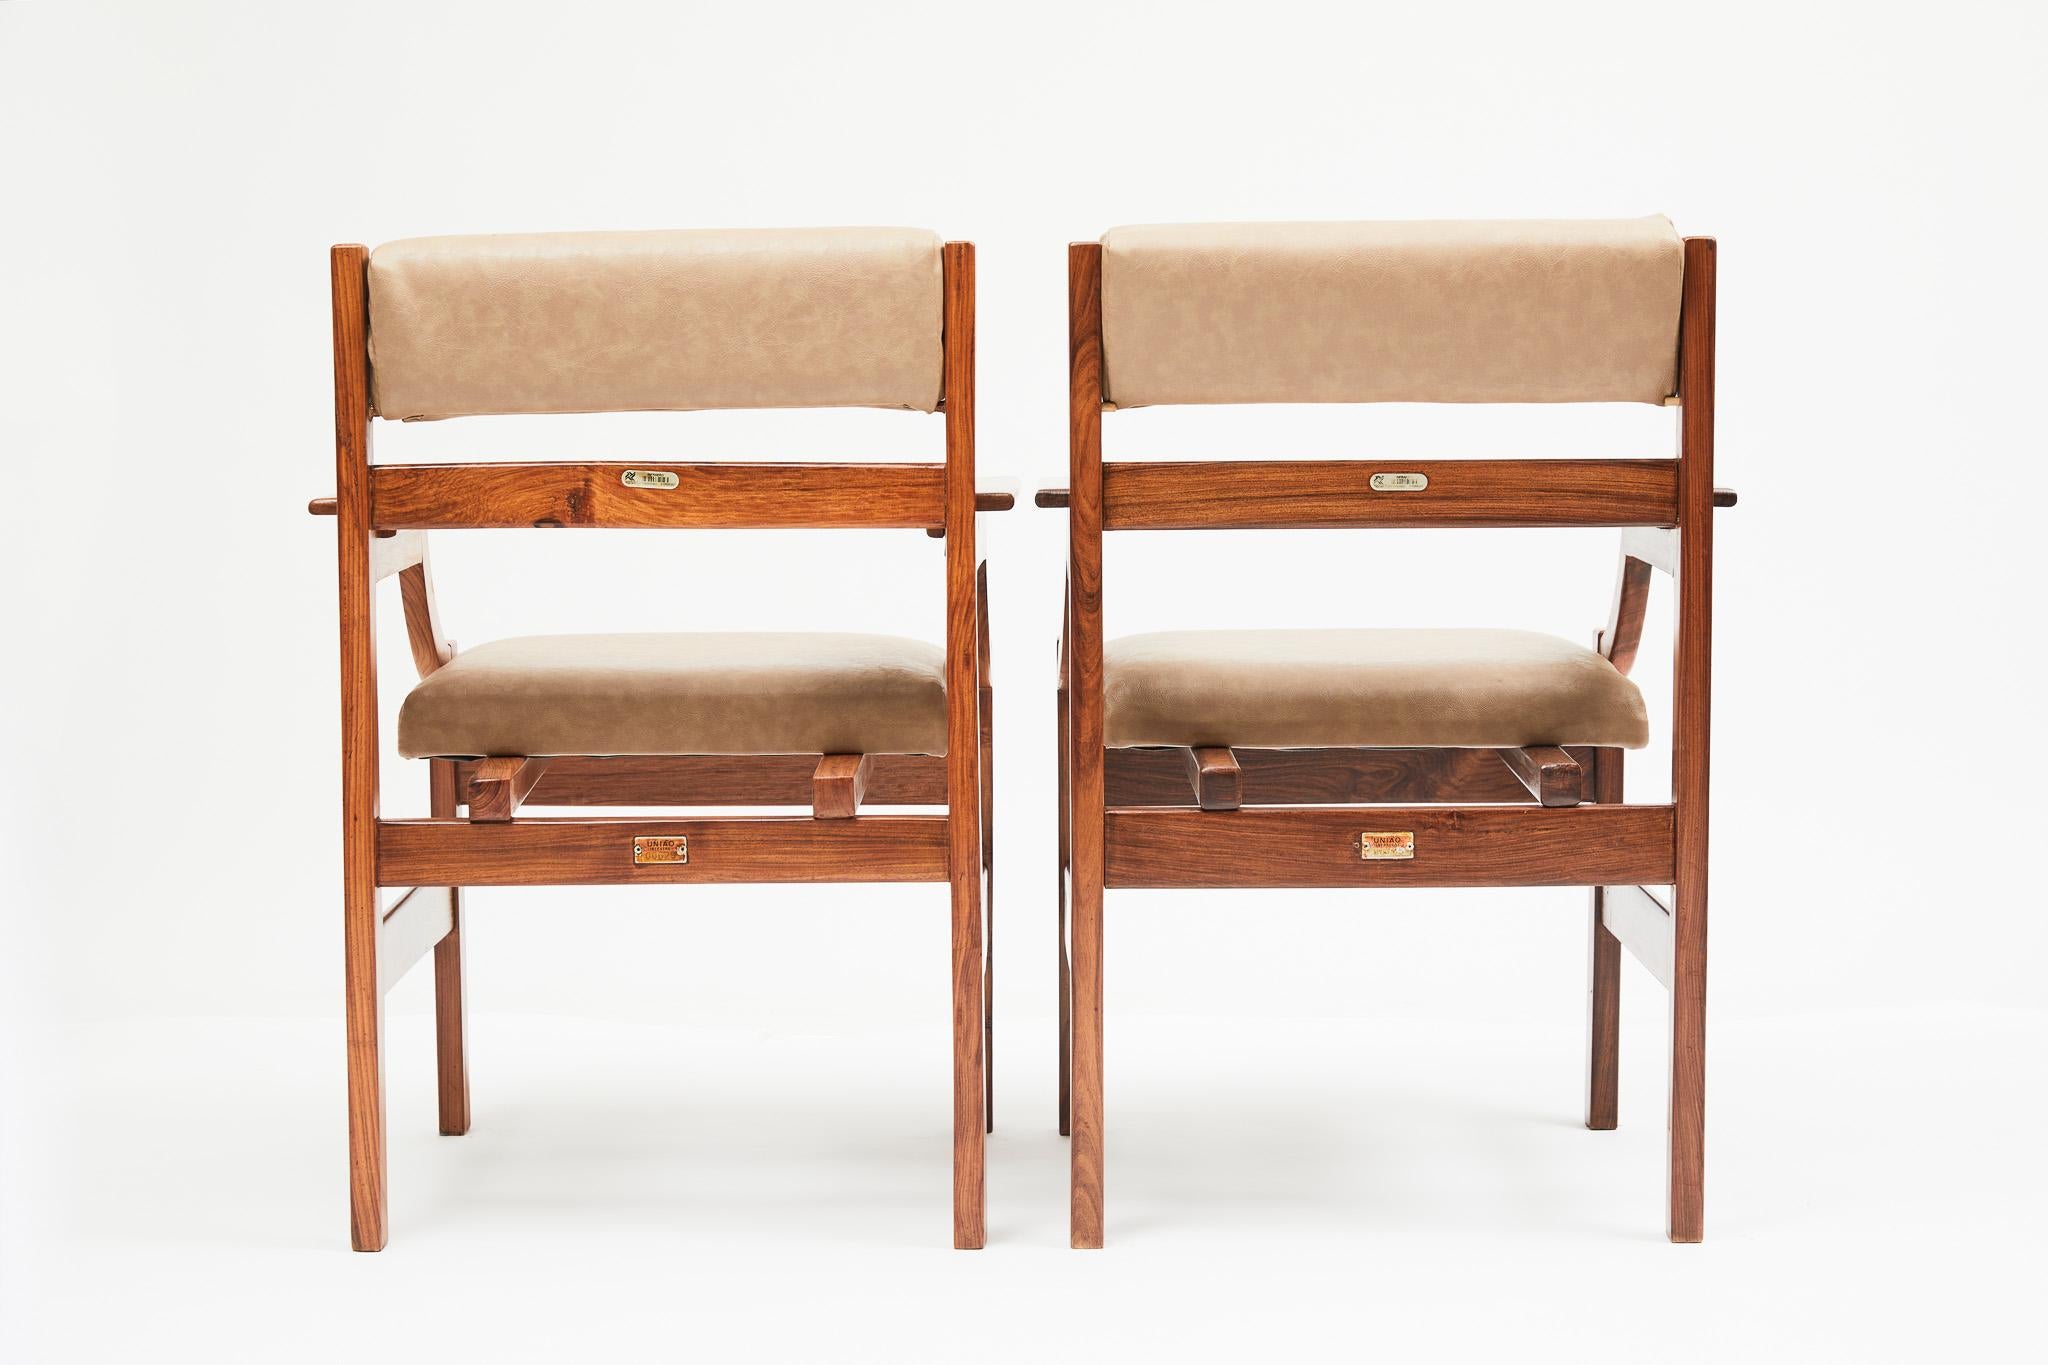 20th Century Mid-Century Modern Armchair Set in Hardwood & Brown Leather, 1960, Brazil Plaque For Sale